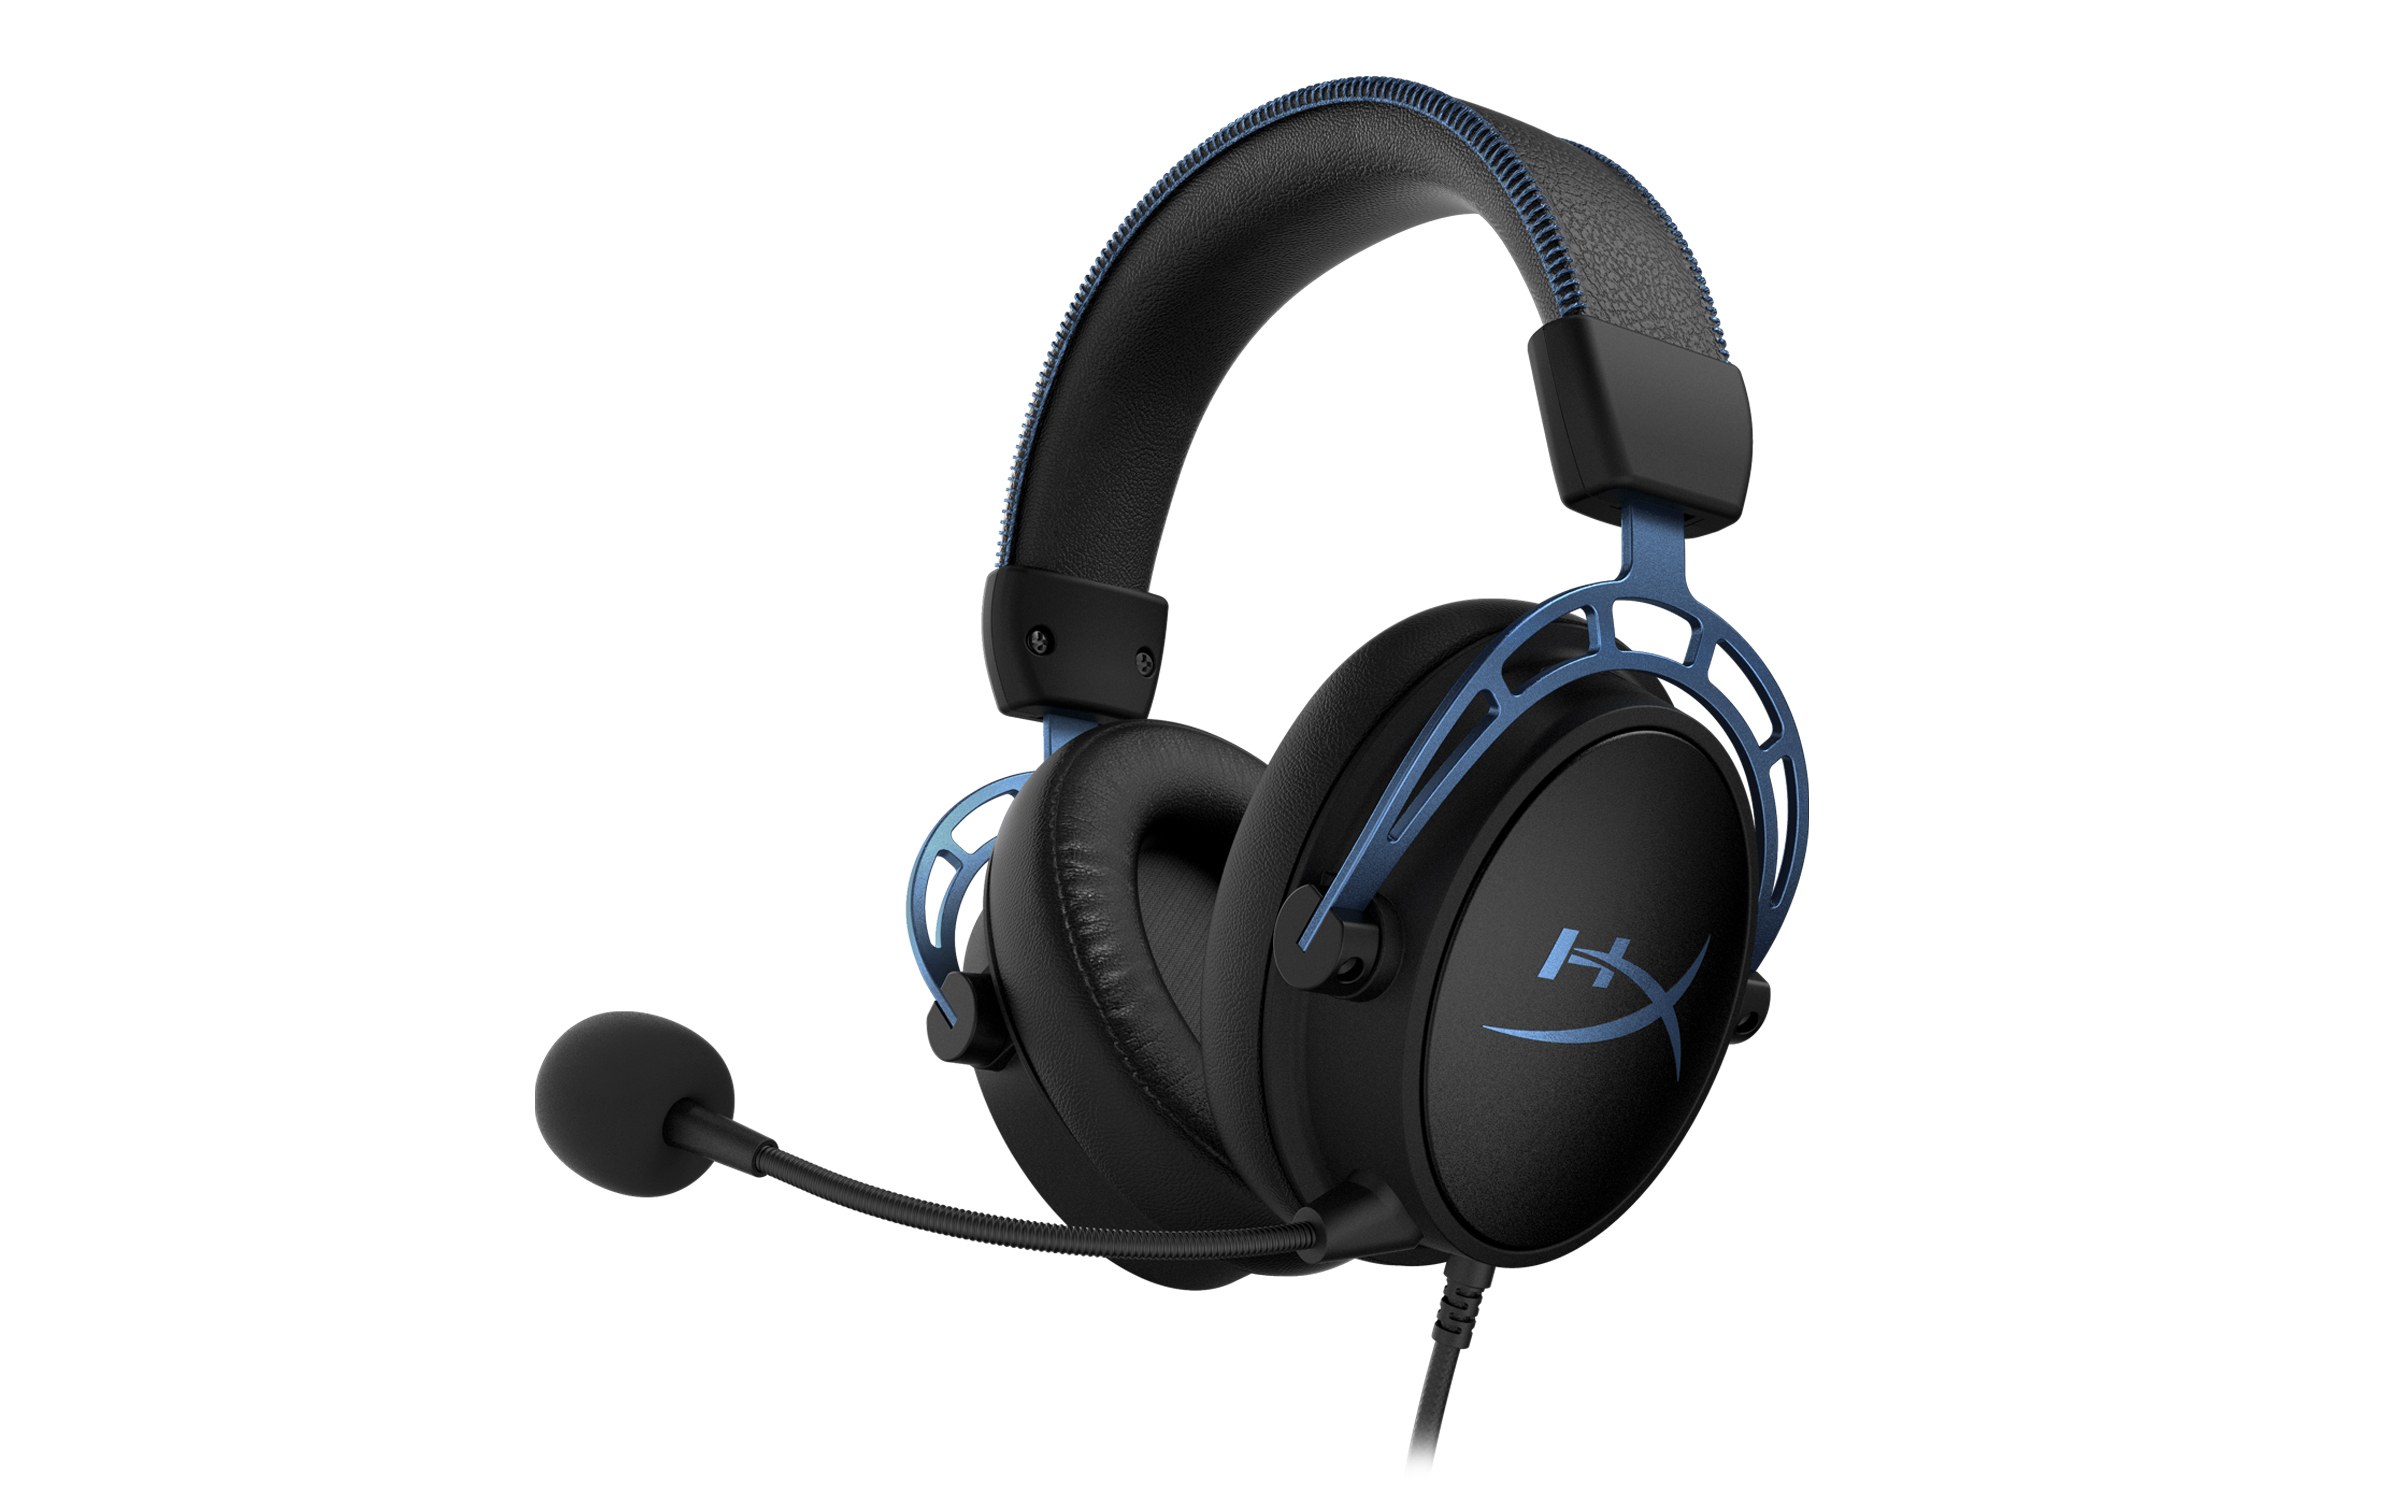 The HyperX Cloud Alpha S adds new features to an already amazing headset